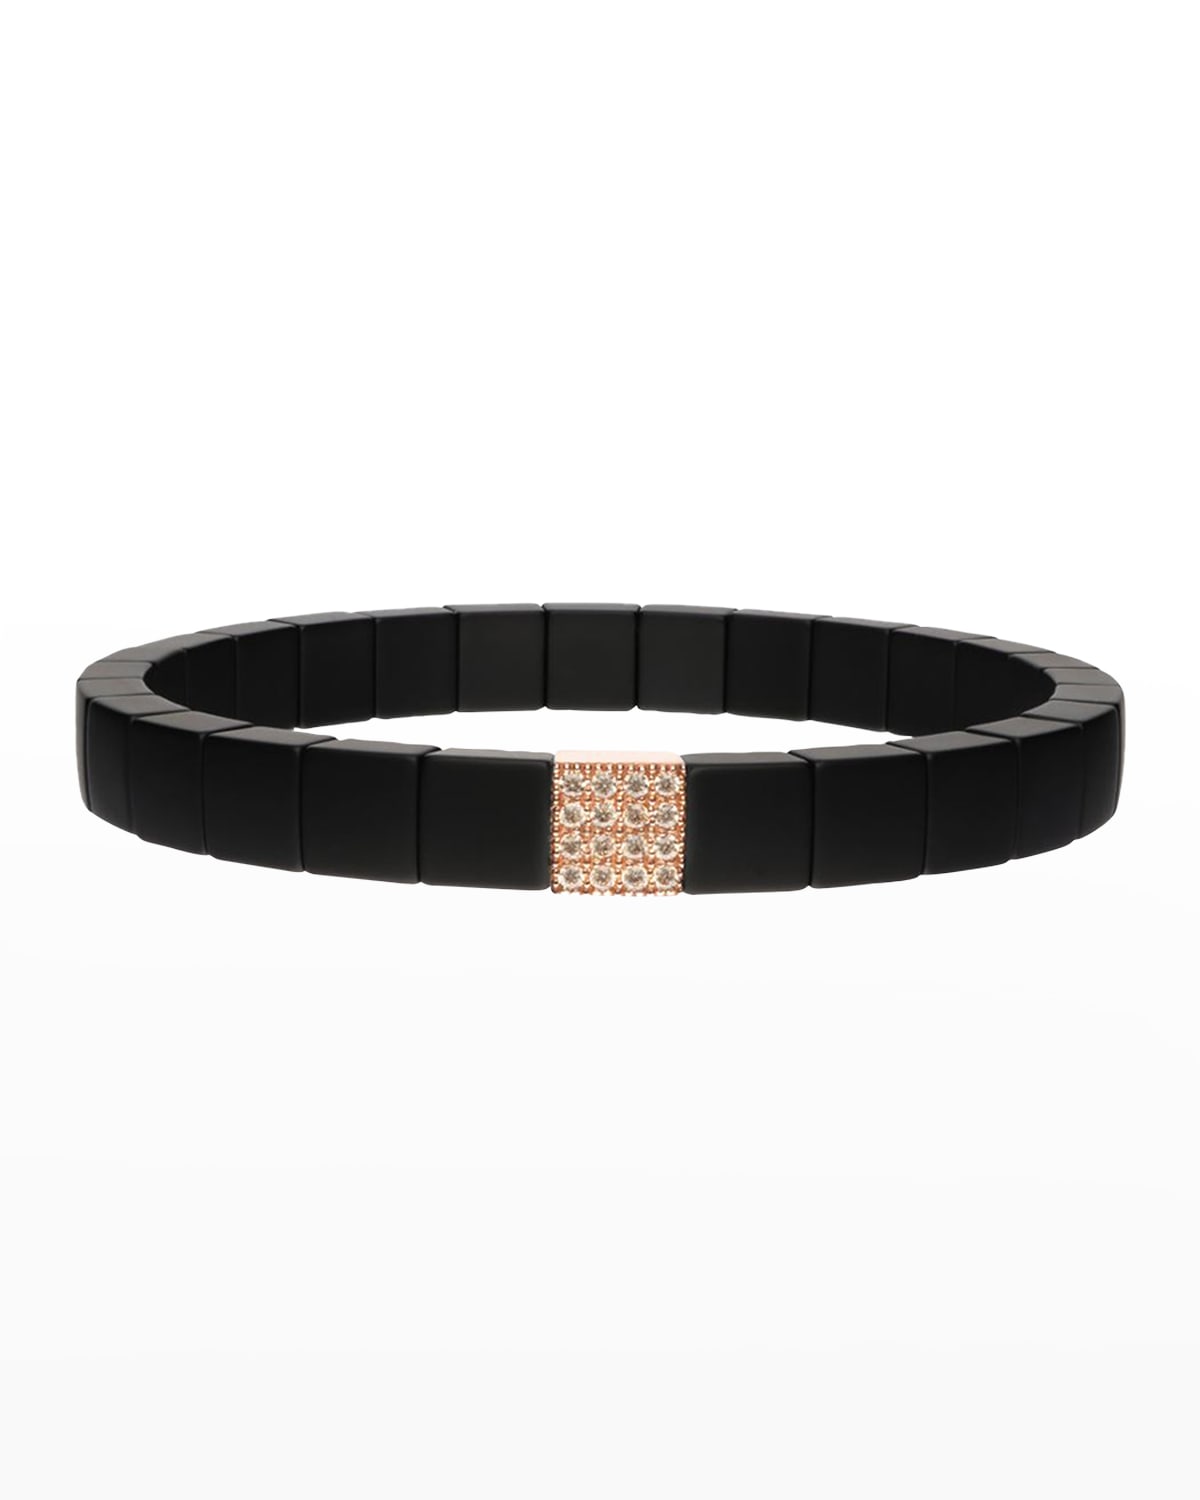 Roberto Demeglio Rose Gold And Matte Black Ceramic Scacco Stretch Bracelet With One Champagne Diamond Section